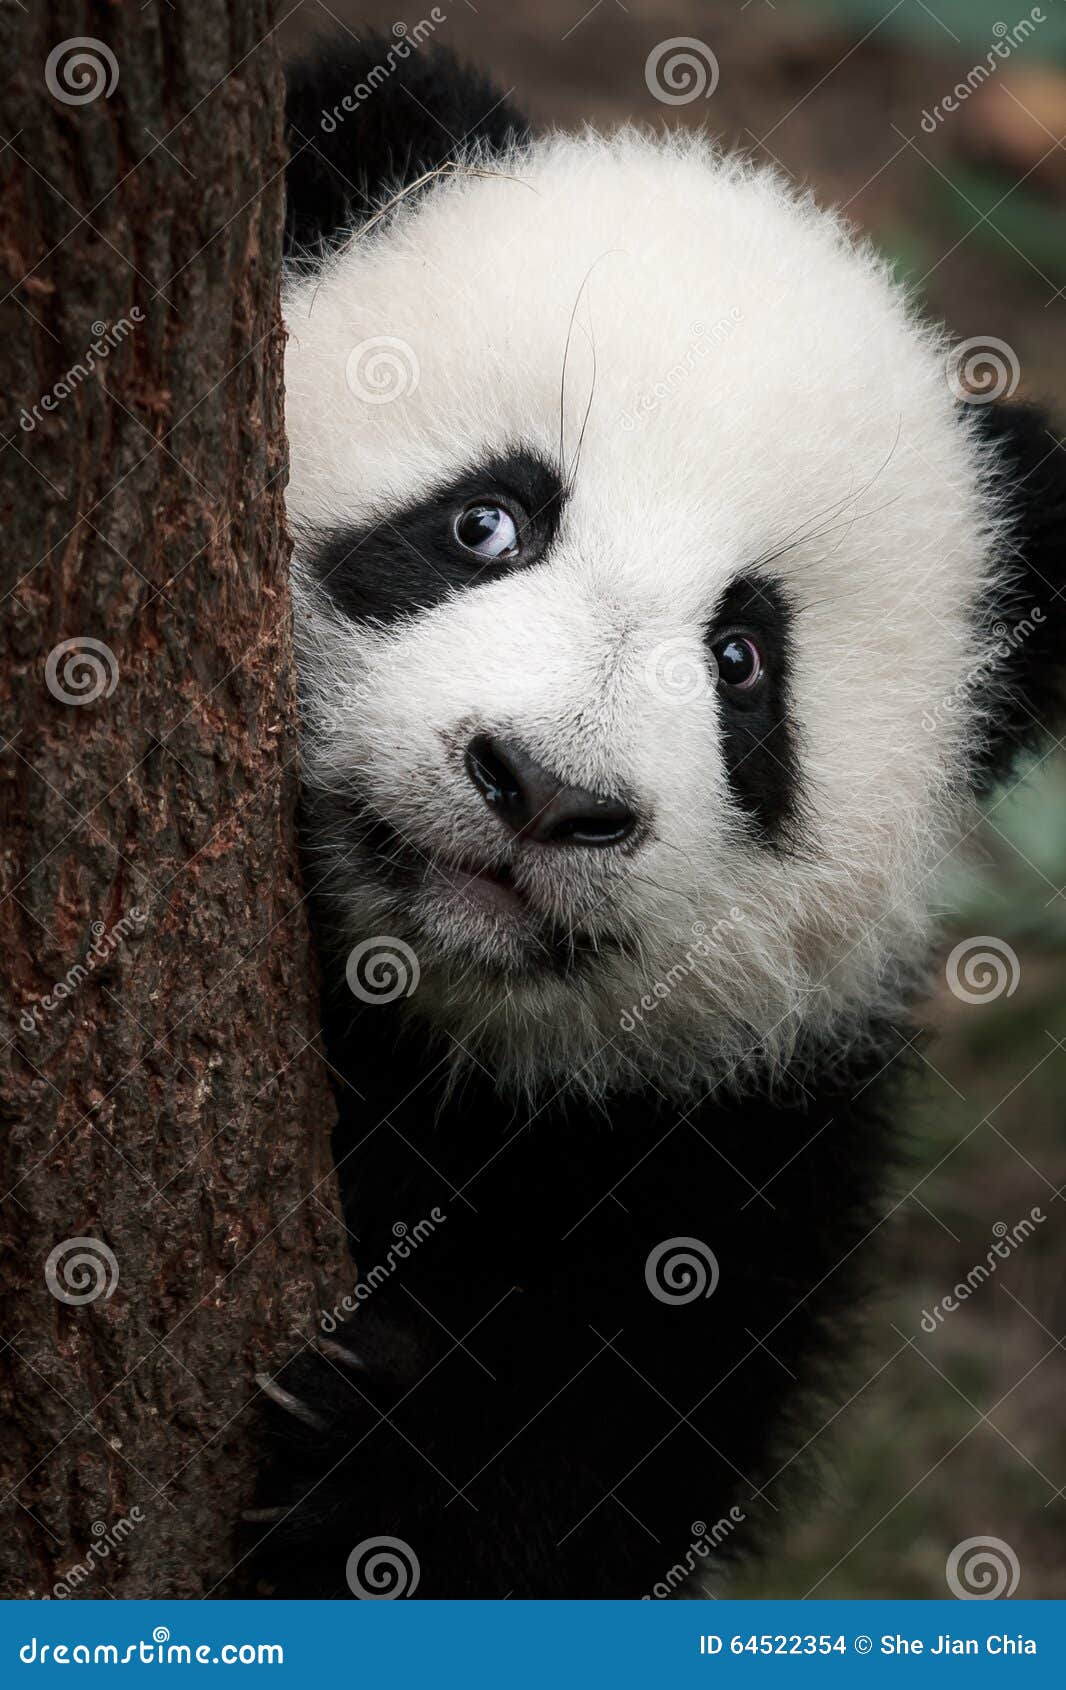 43+ Thousand Cute Panda Face Royalty-Free Images, Stock Photos & Pictures